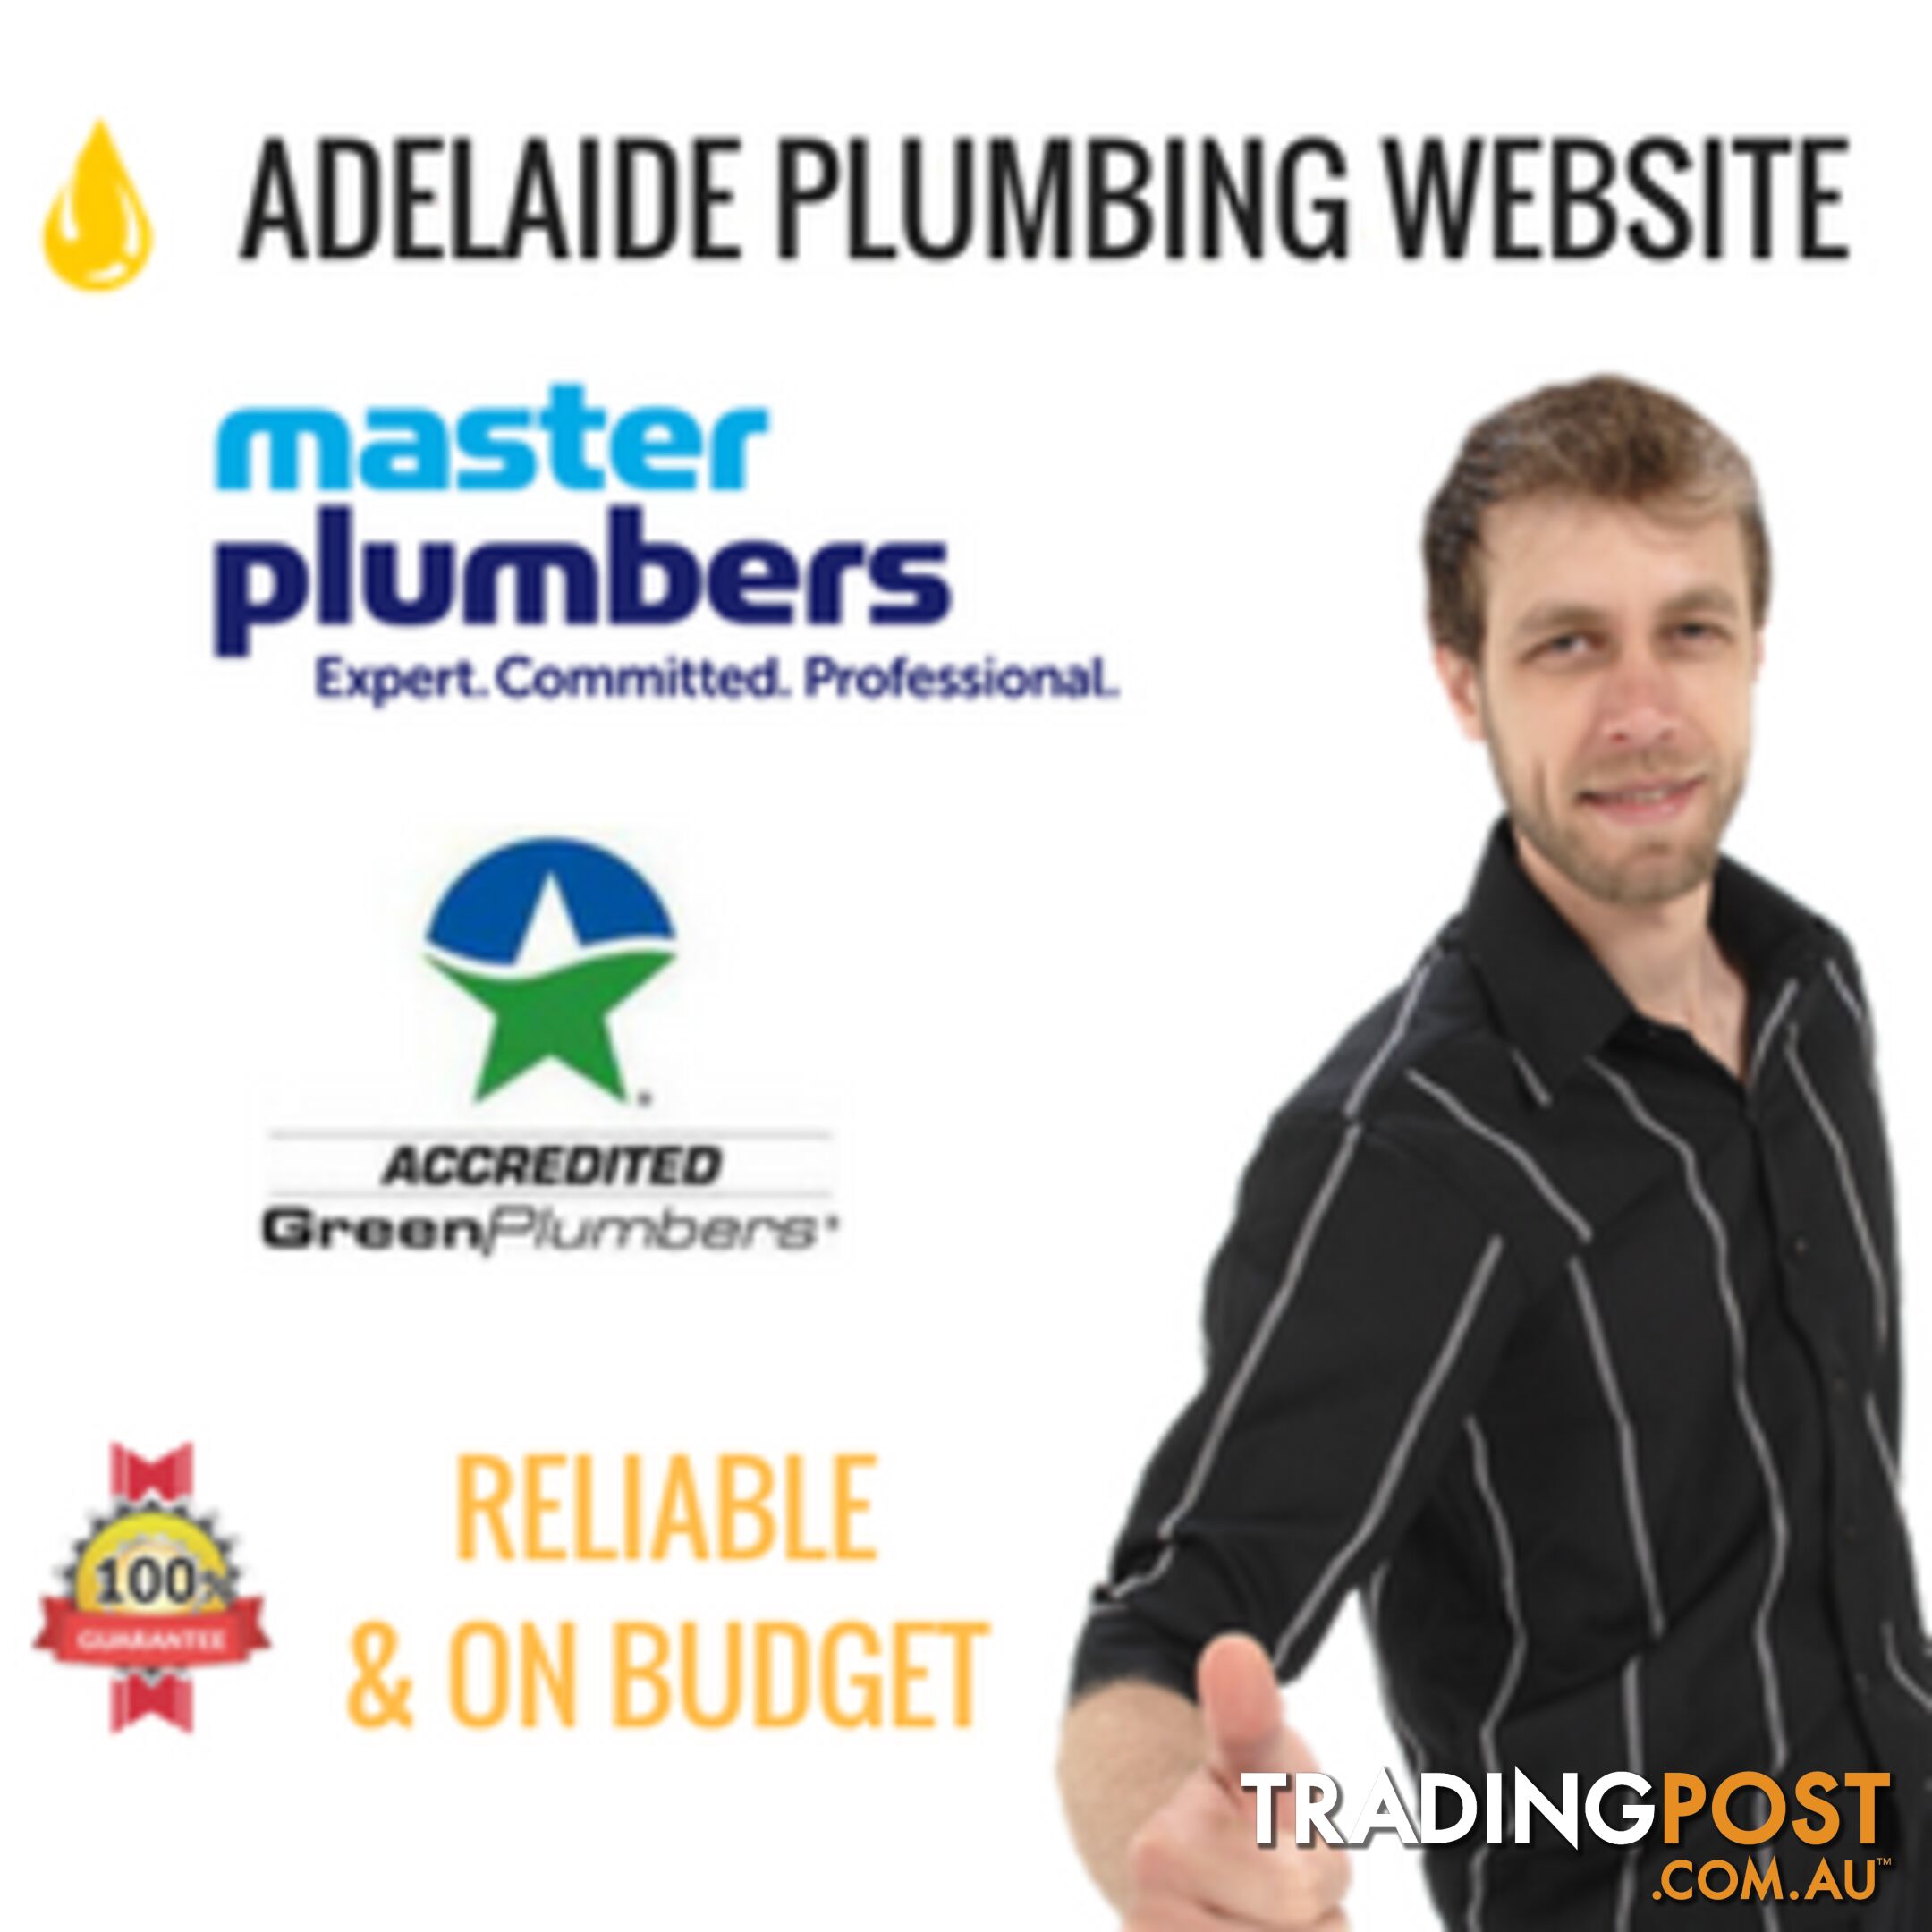 Plumbers - Need More Customers? Rent A Lead Generating Website & Domain from $15pw  Why put off gett